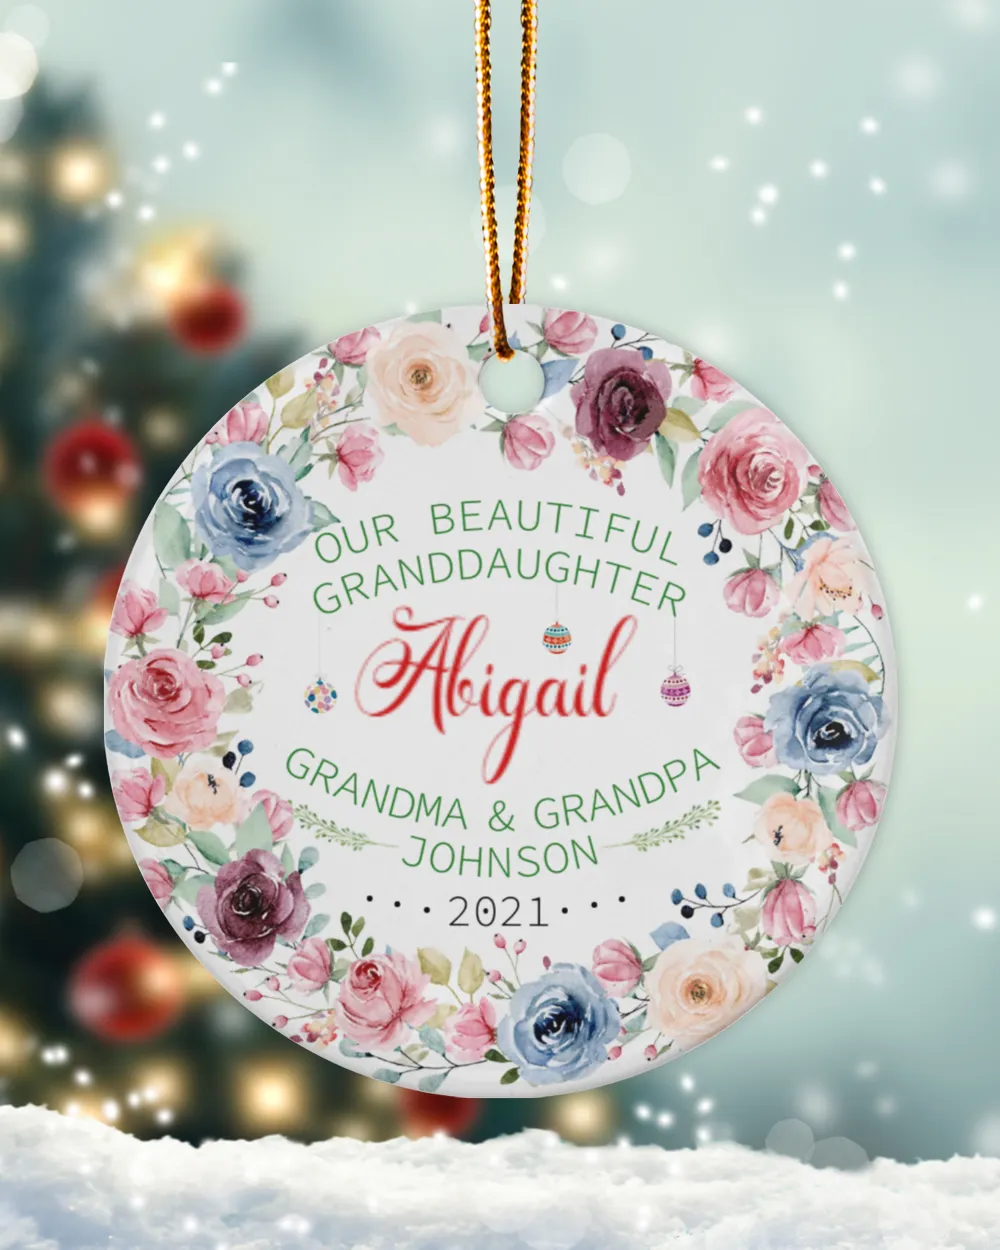 DC Personalized Granddaughter Christmas Ornaments, Ornaments for Girls, Children's Christmas Ornament, Grand Child Ornament